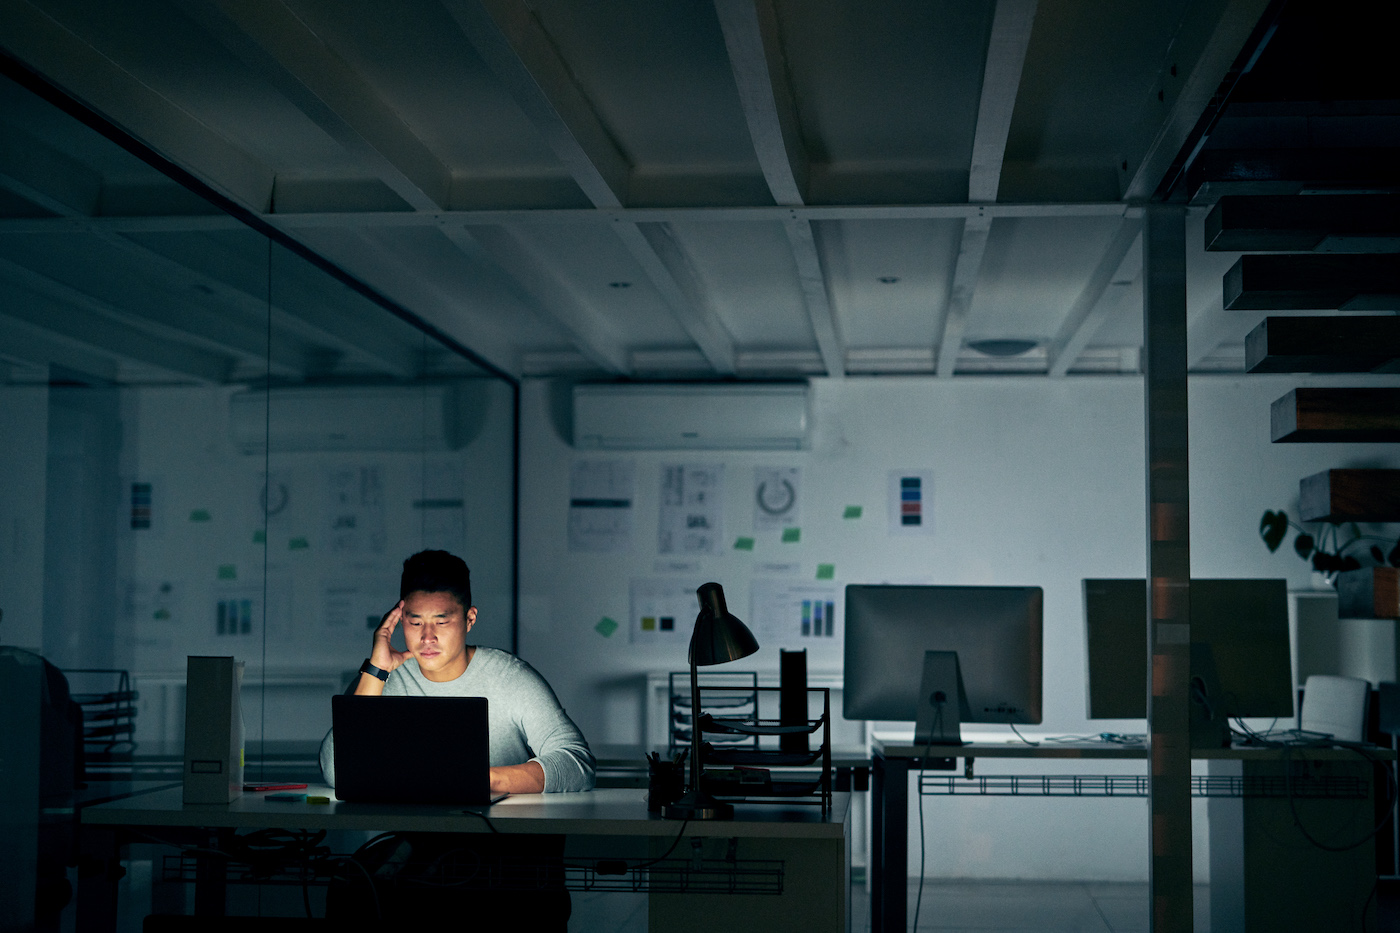 IT support agent working late in a dark office, depicting job satisfaction and agent turnover